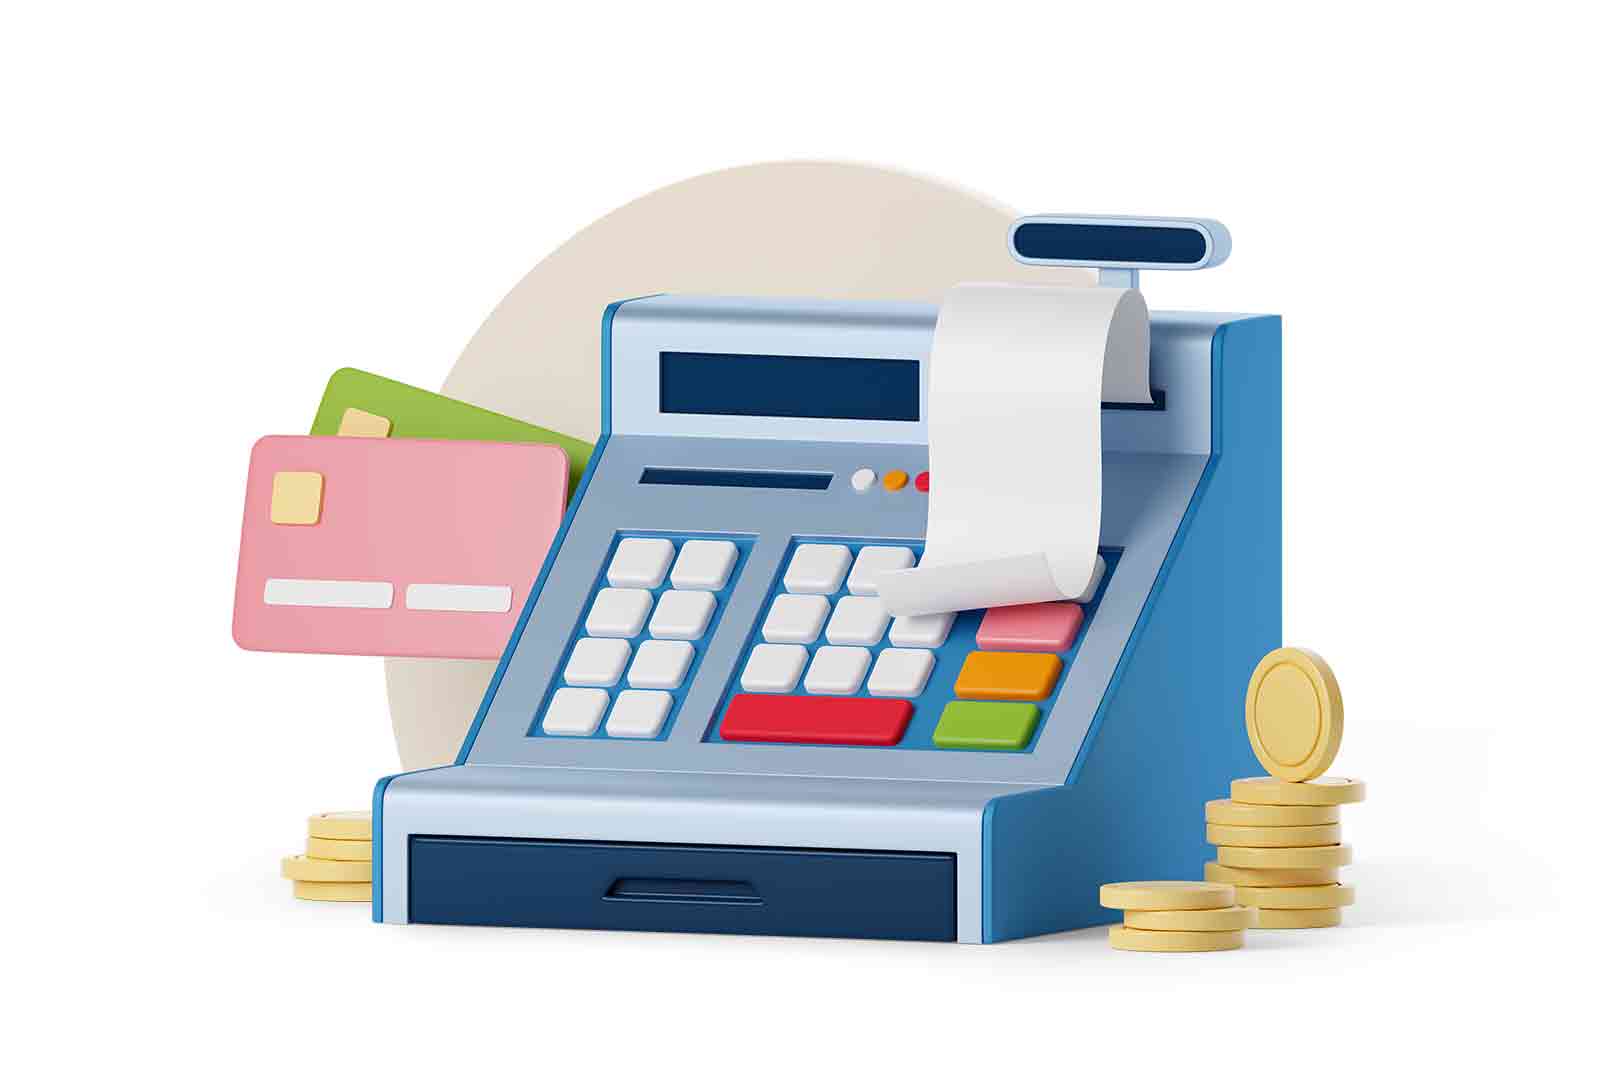 Cash register 3d rendered icon illustration. Machine for regulating money transactions with customers. Shopping concept